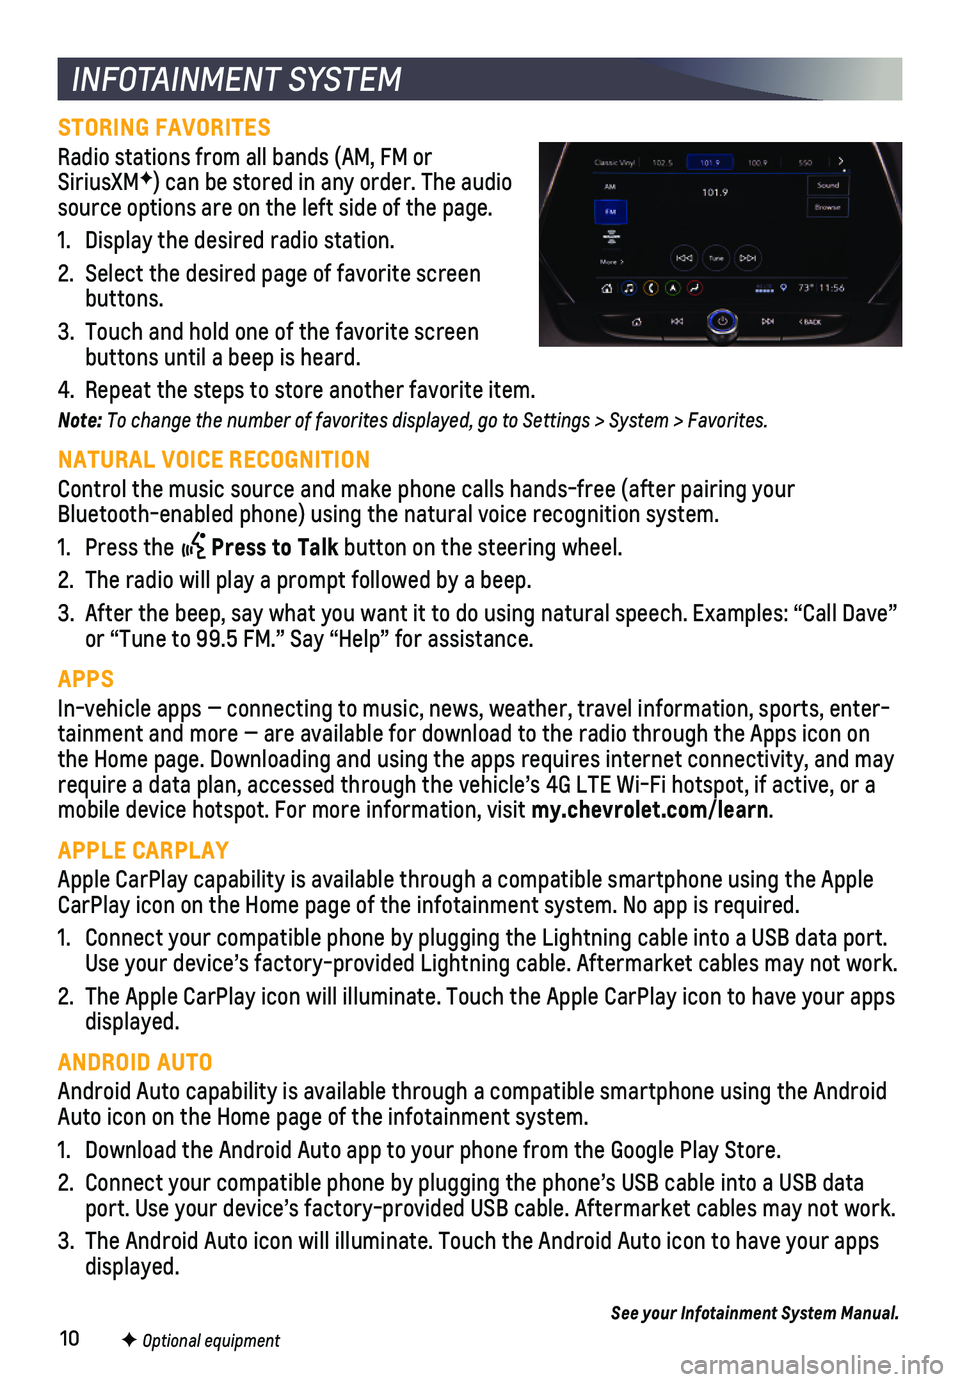 CHEVROLET BLAZER 2019  Get To Know Guide 10F Optional equipment 
INFOTAINMENT SYSTEM
STORING FAVORITES 
Radio stations from all bands (AM, FM or SiriusXMF) can be stored in any order. The audio source options are on the left side of the page